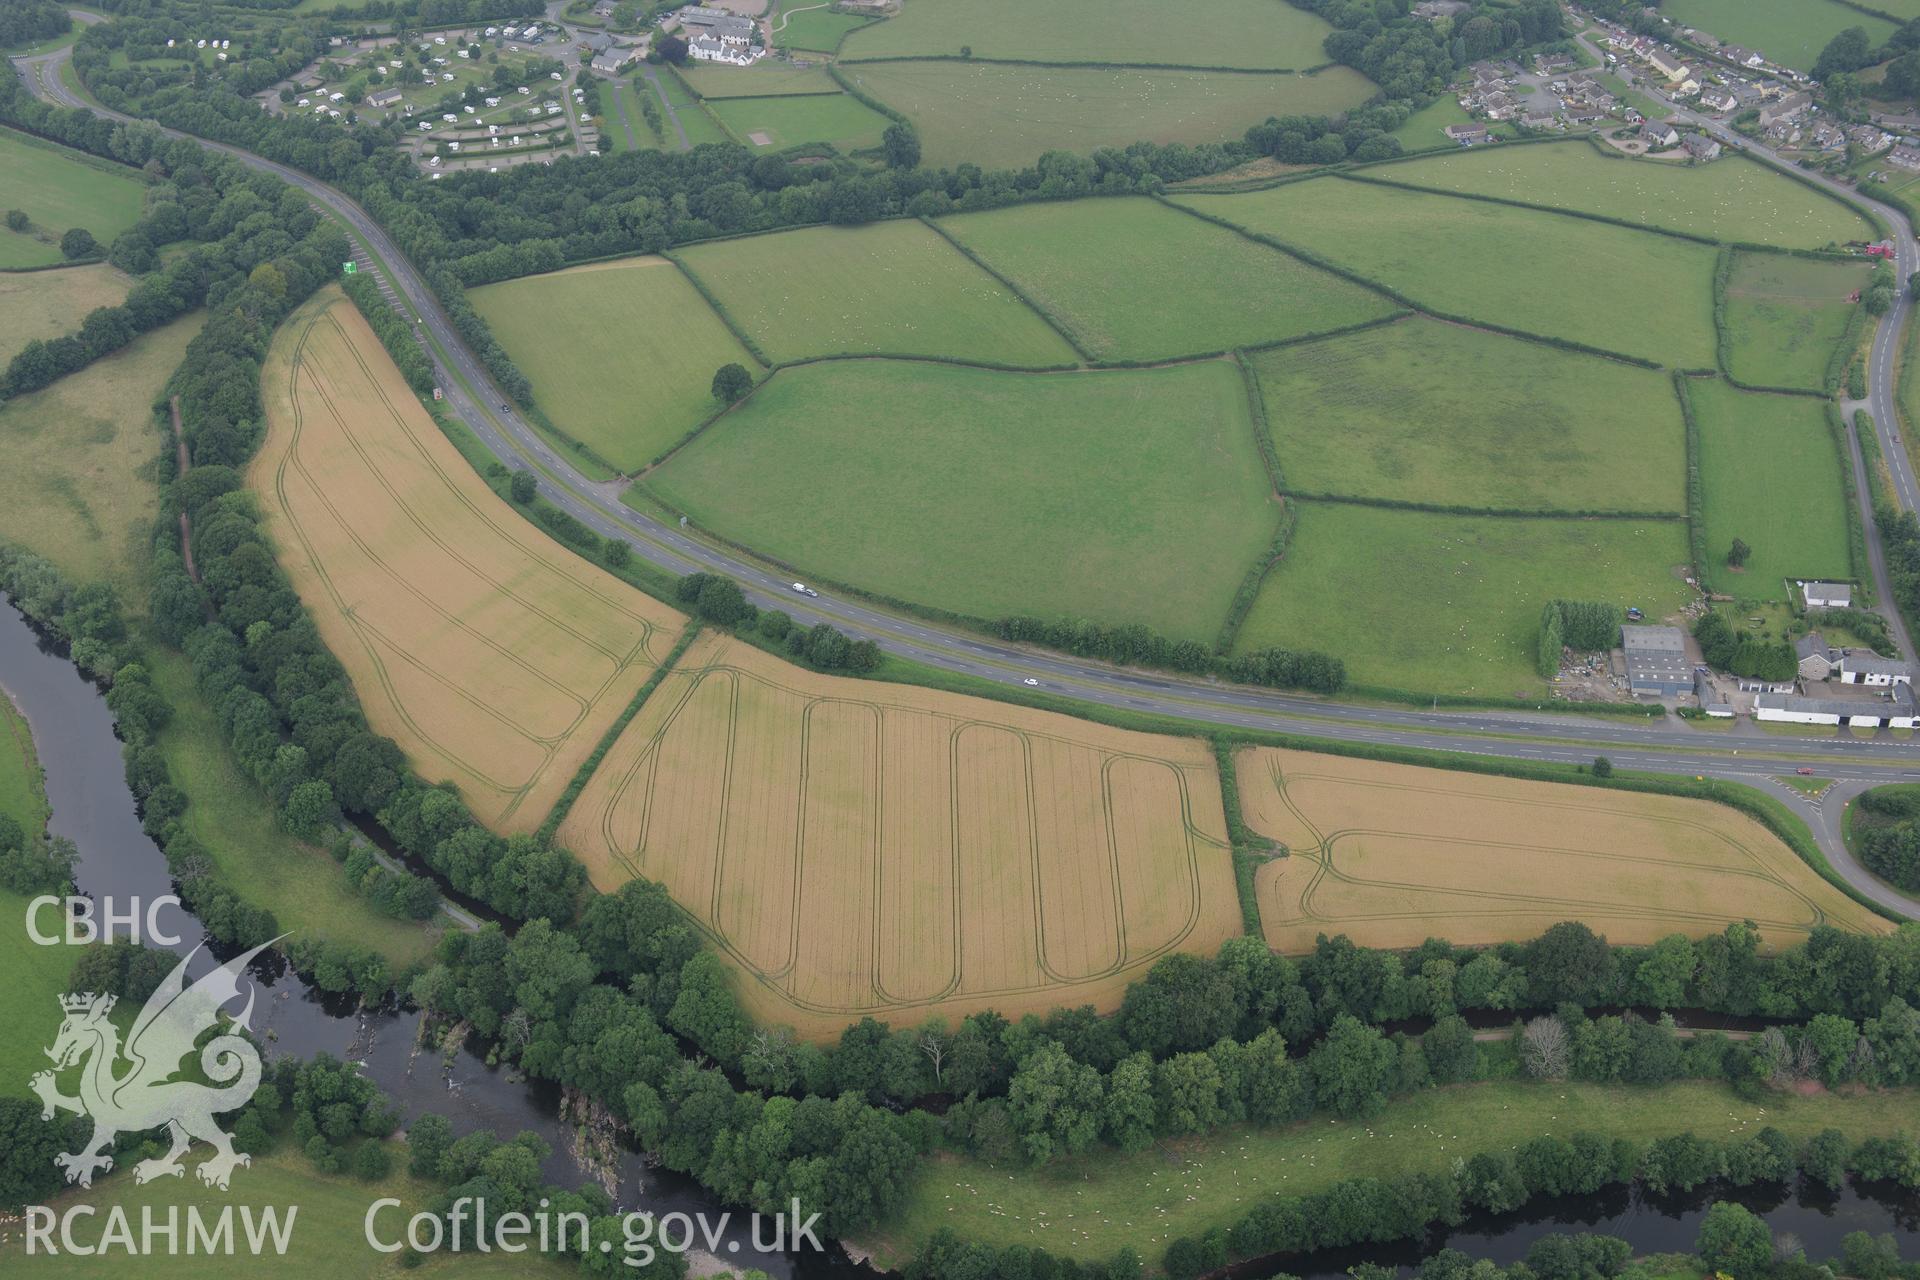 Cefn-brynich Roman fort, general view of cropmarks from south, taken by RCAHMW 1st August 2013.